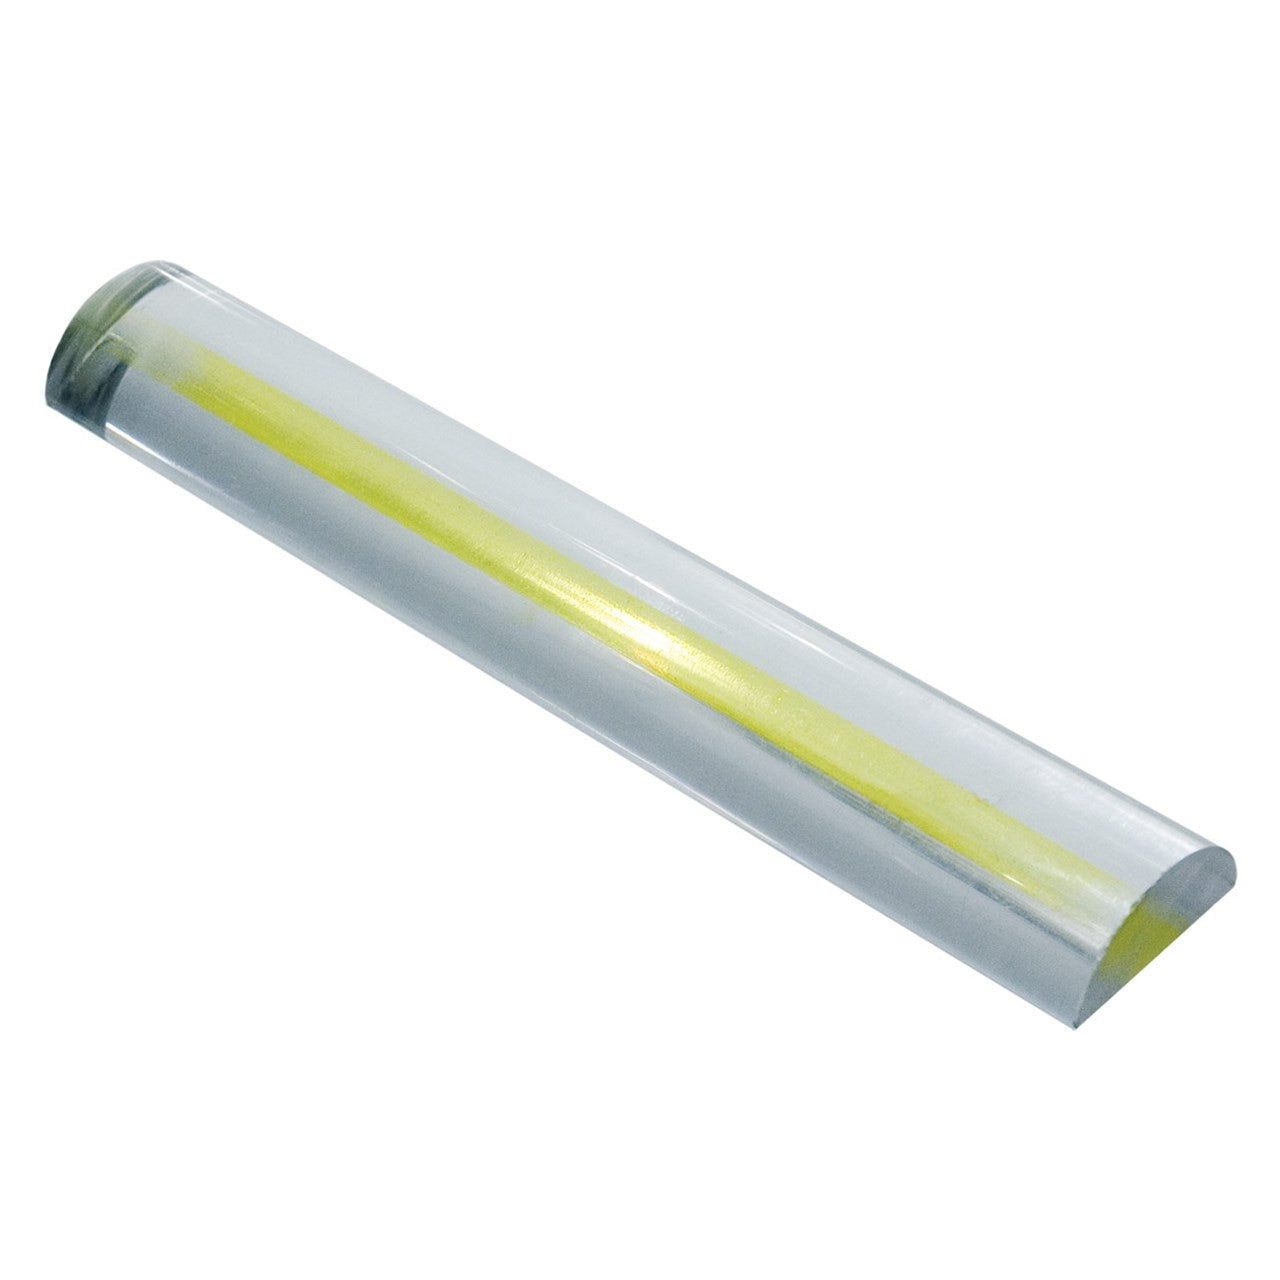 Bar Magnifier 6" with yellow line